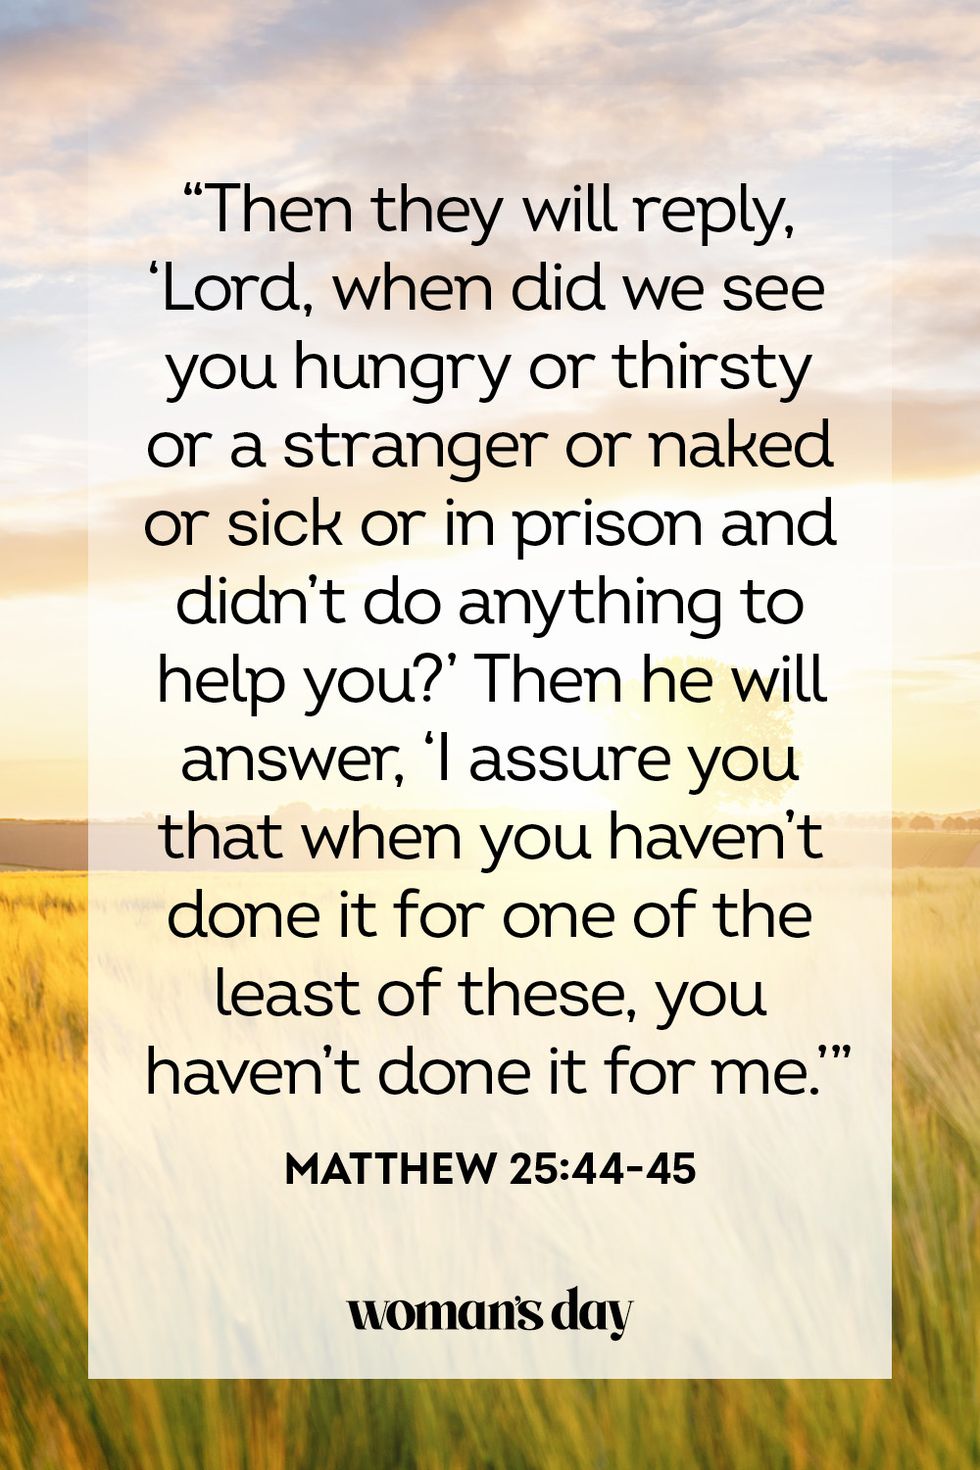 bible-verses-helping-others10-1626799250.jpg